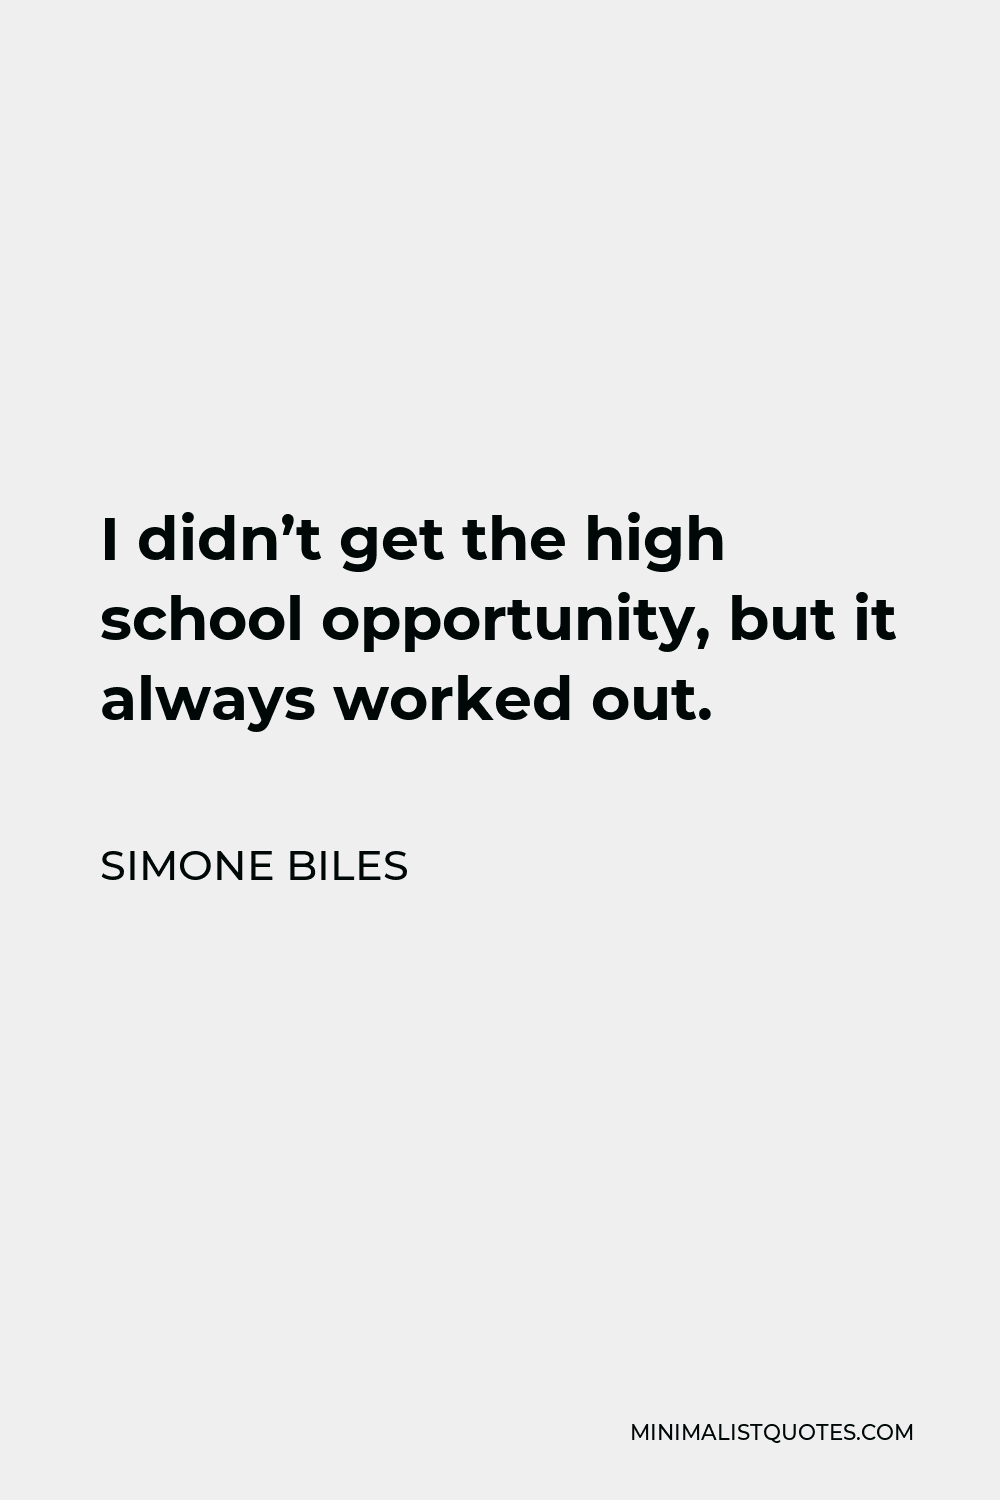 Simone Biles Quote - I didn’t get the high school opportunity, but it always worked out.